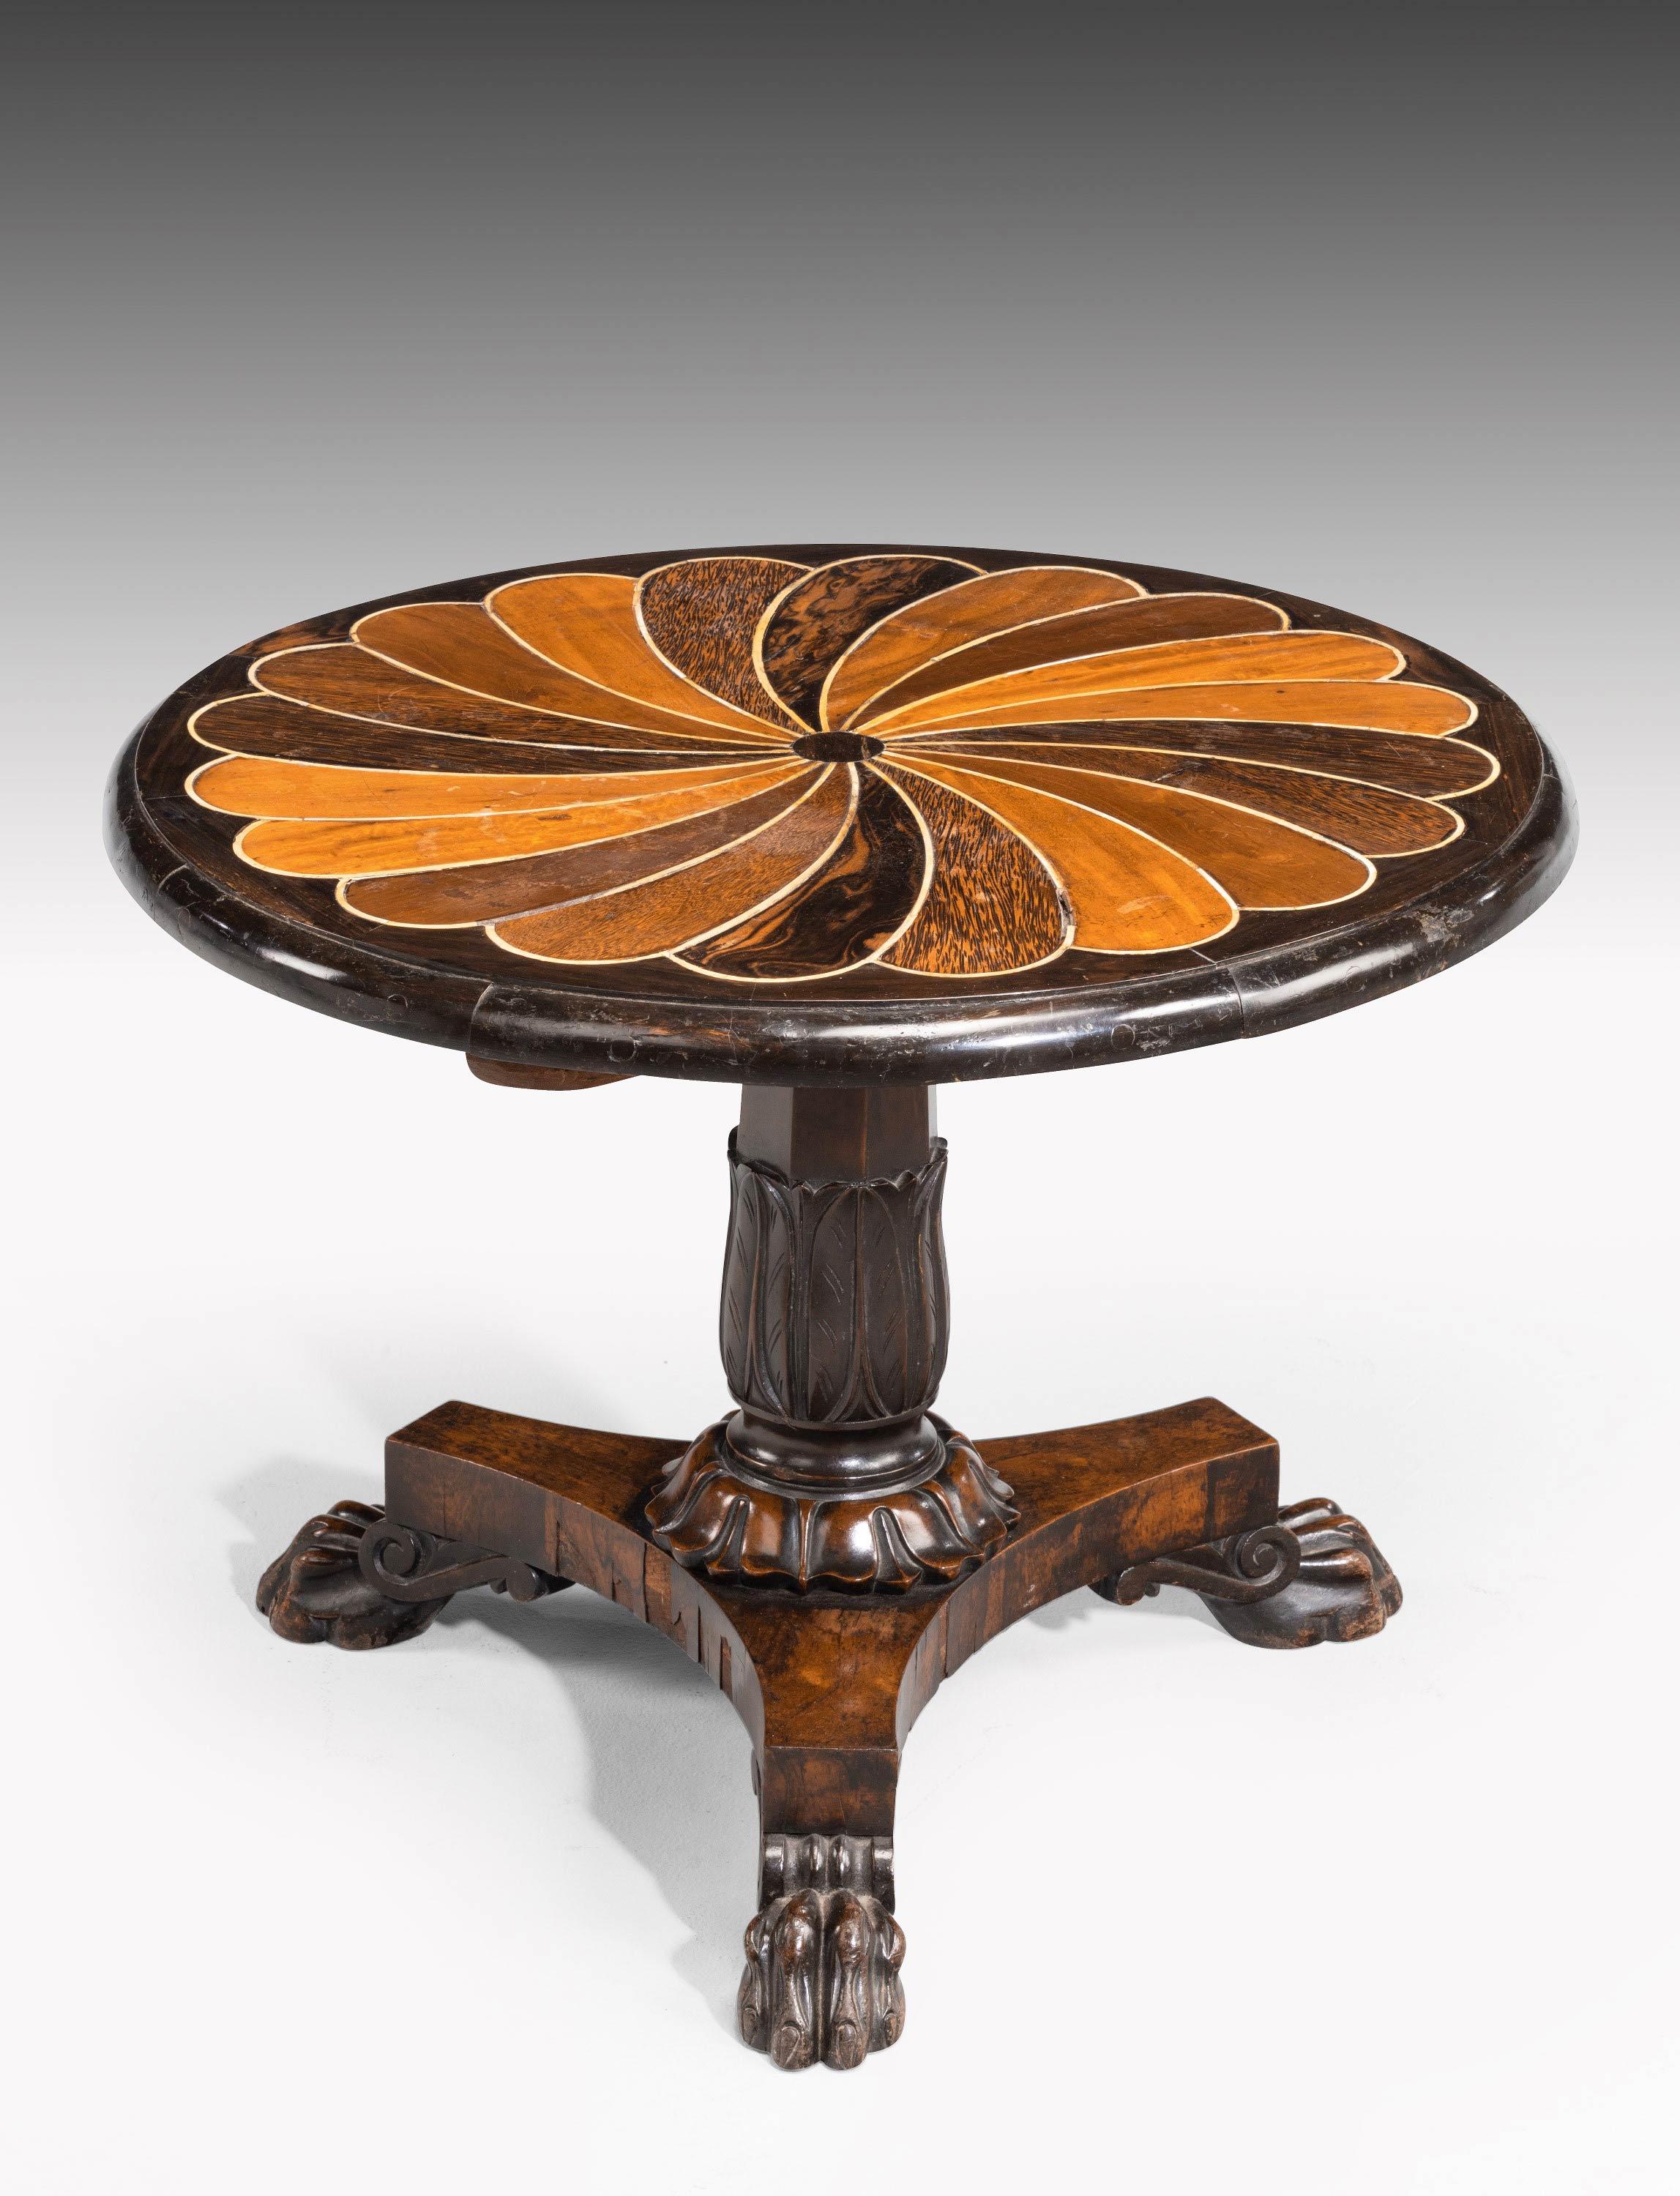 Wood Anglo-Portuguese 19th Century Inlaid Table with Exotic Timbers For Sale